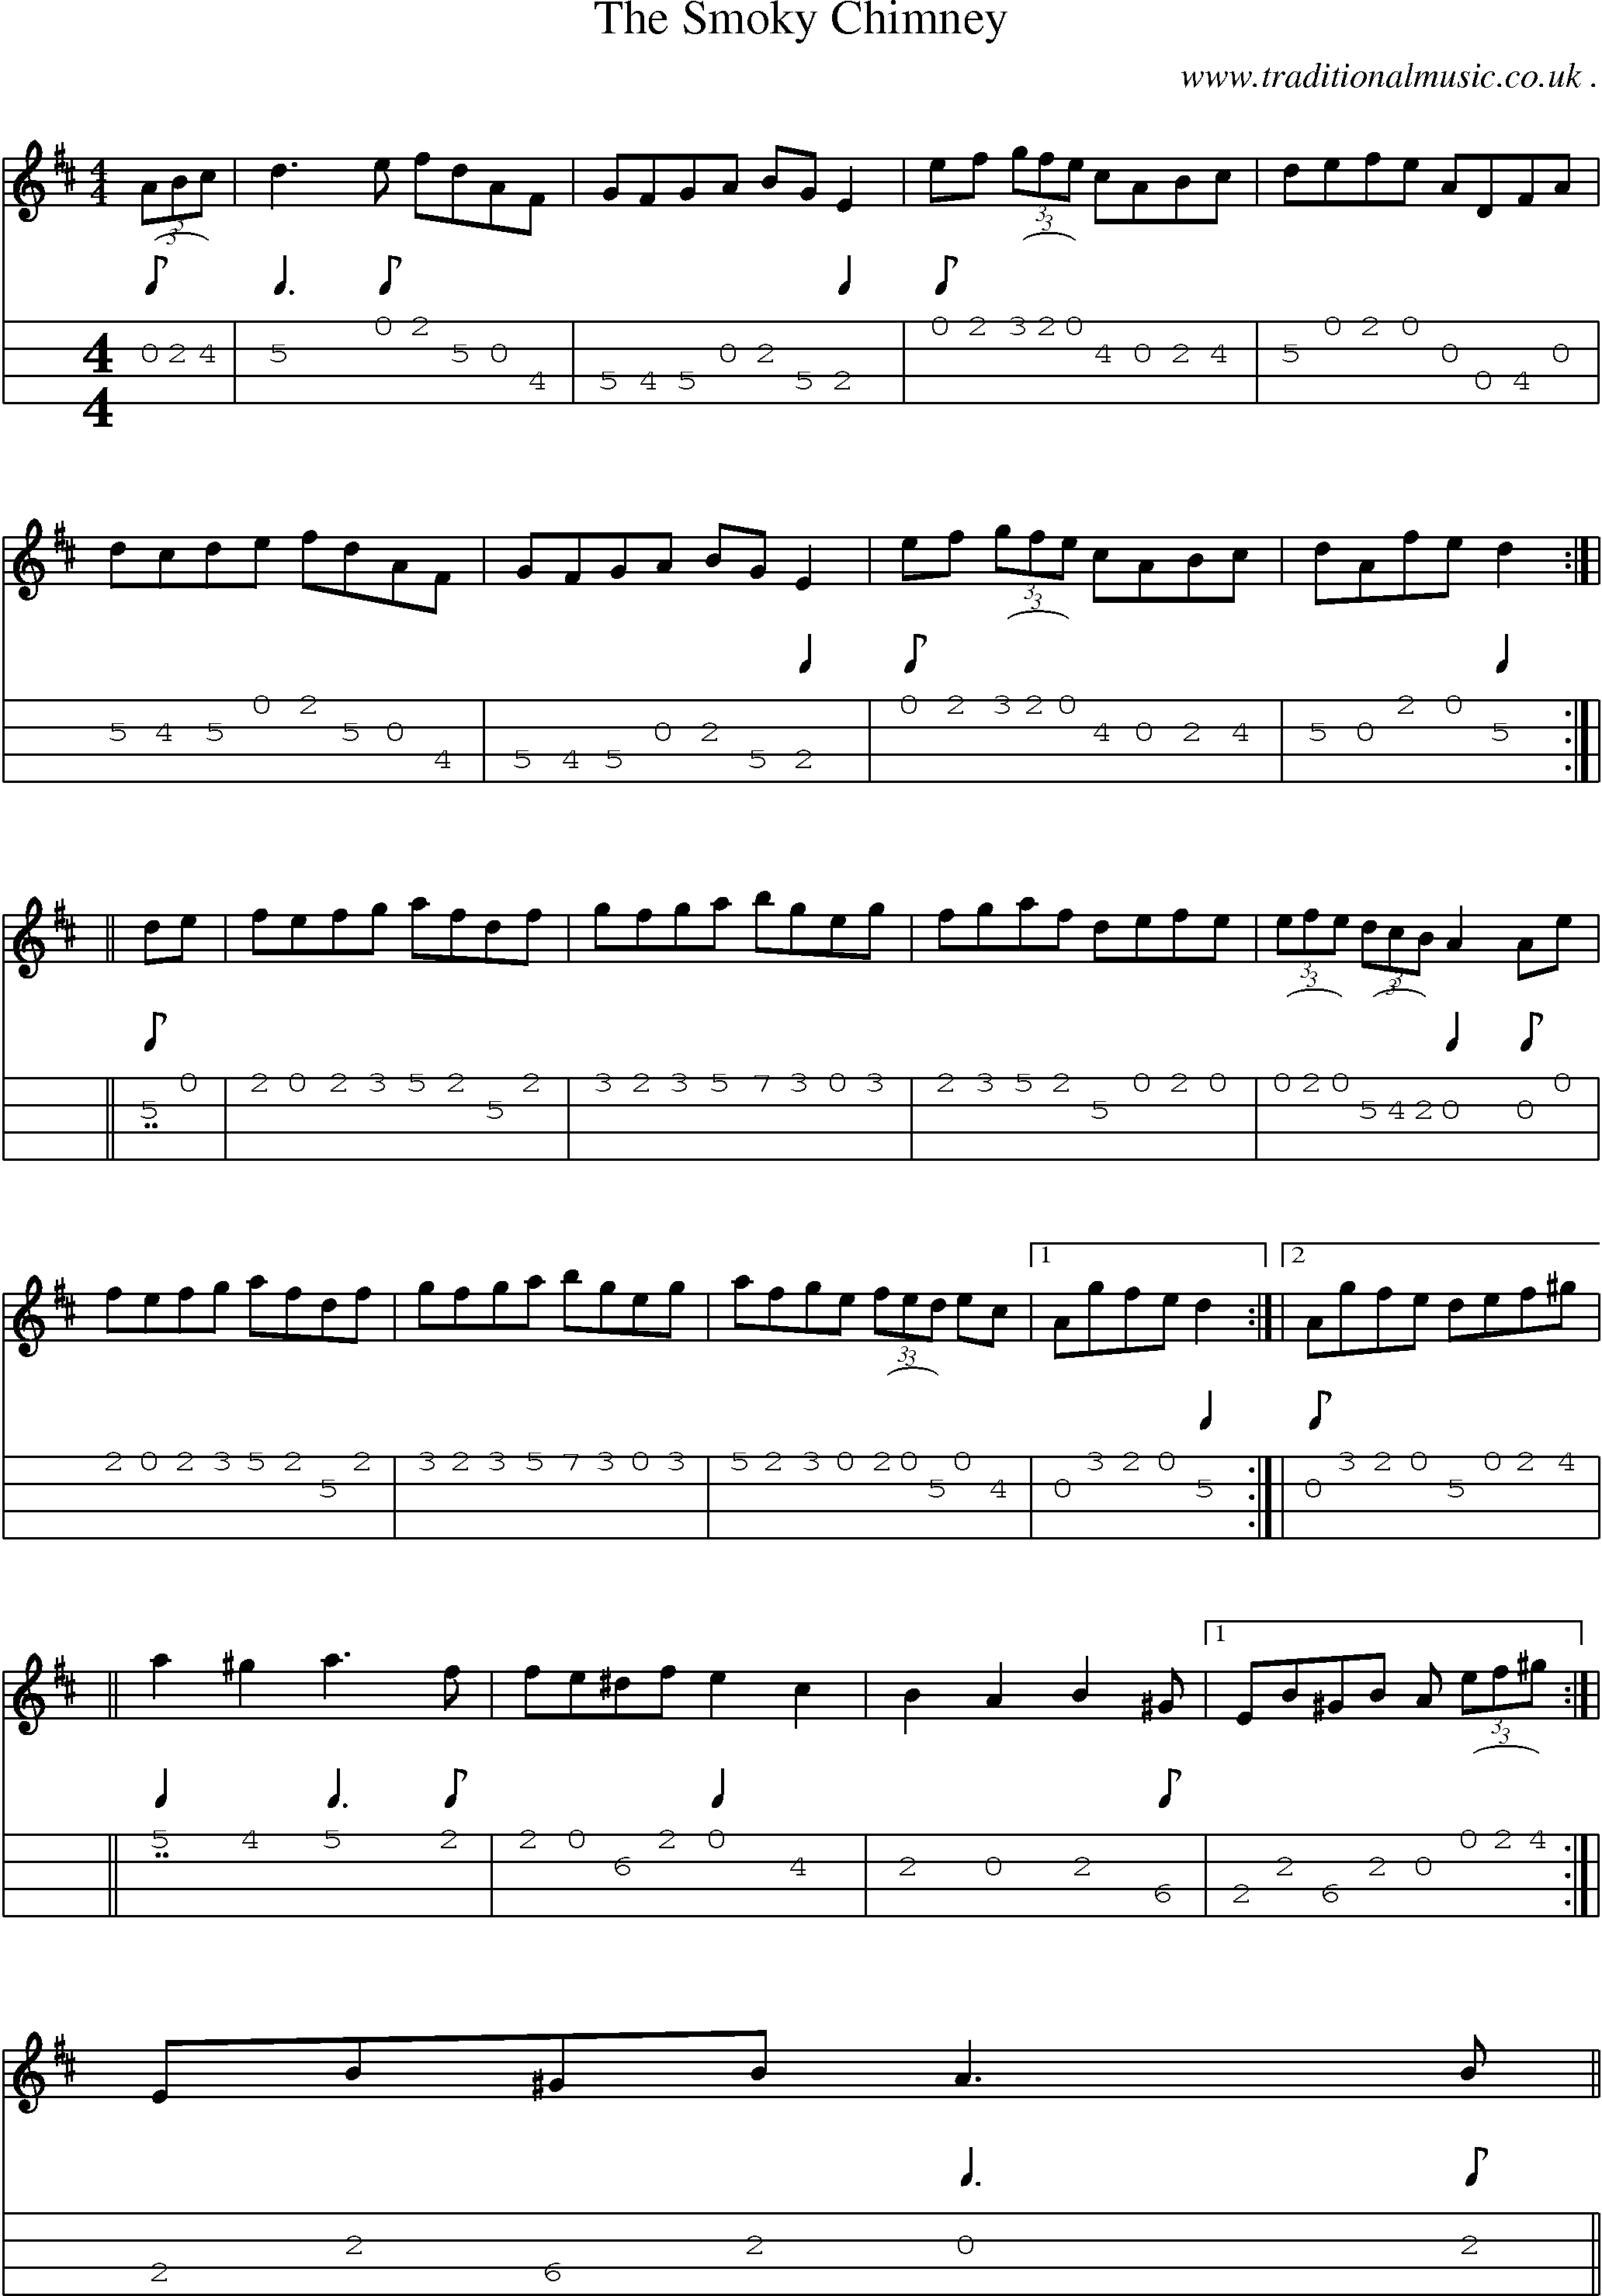 Sheet-Music and Mandolin Tabs for The Smoky Chimney